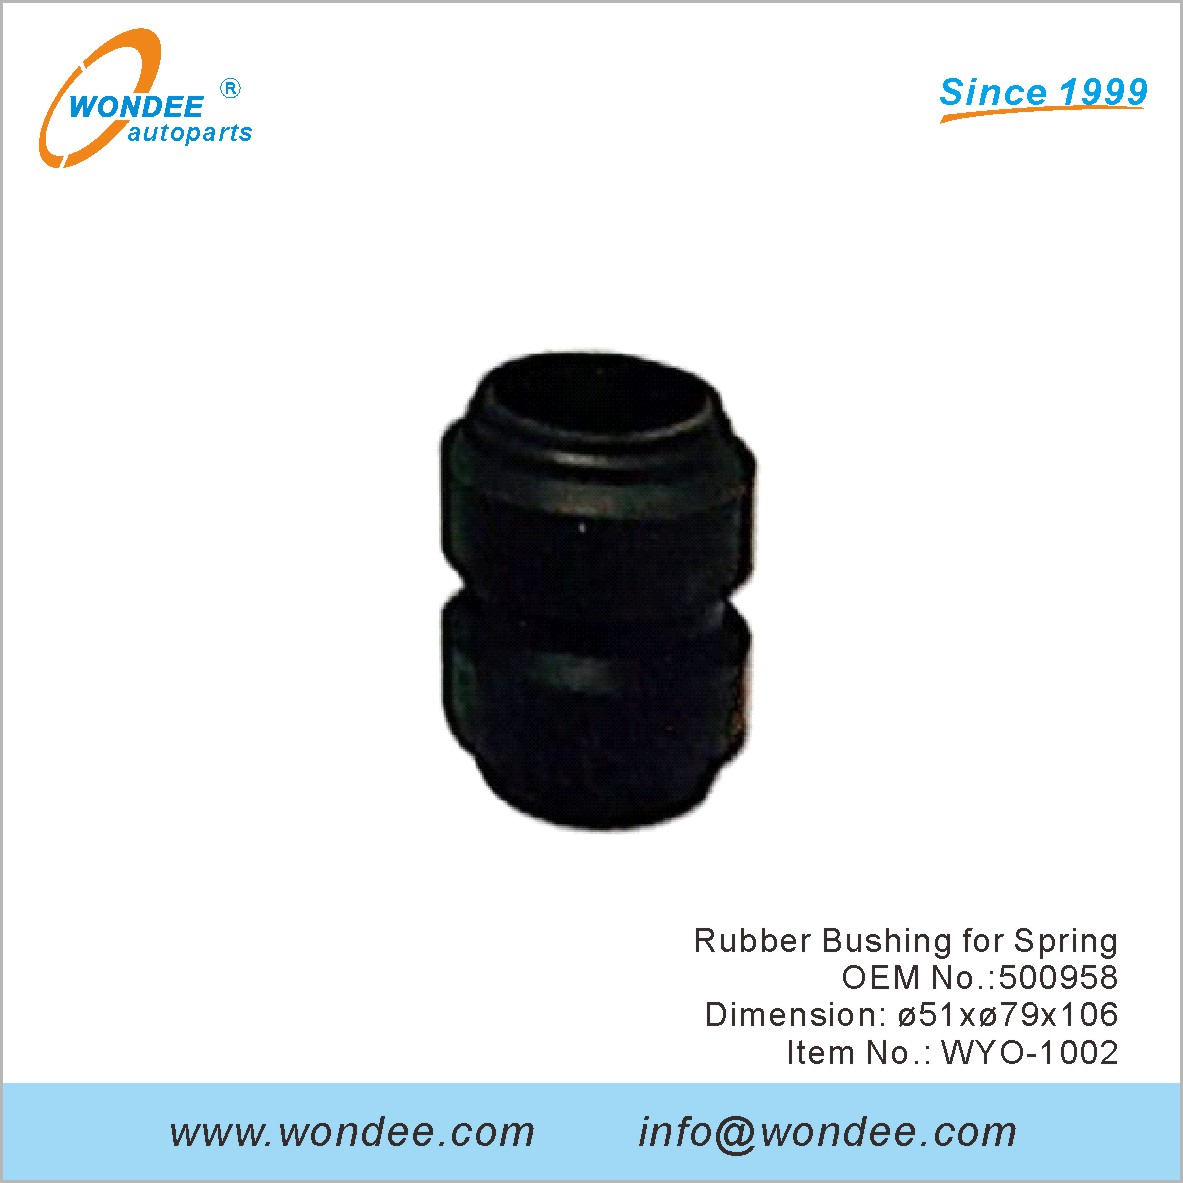 Rubber Bushing for Spring OEM 500958 for Volvo from WONDEE